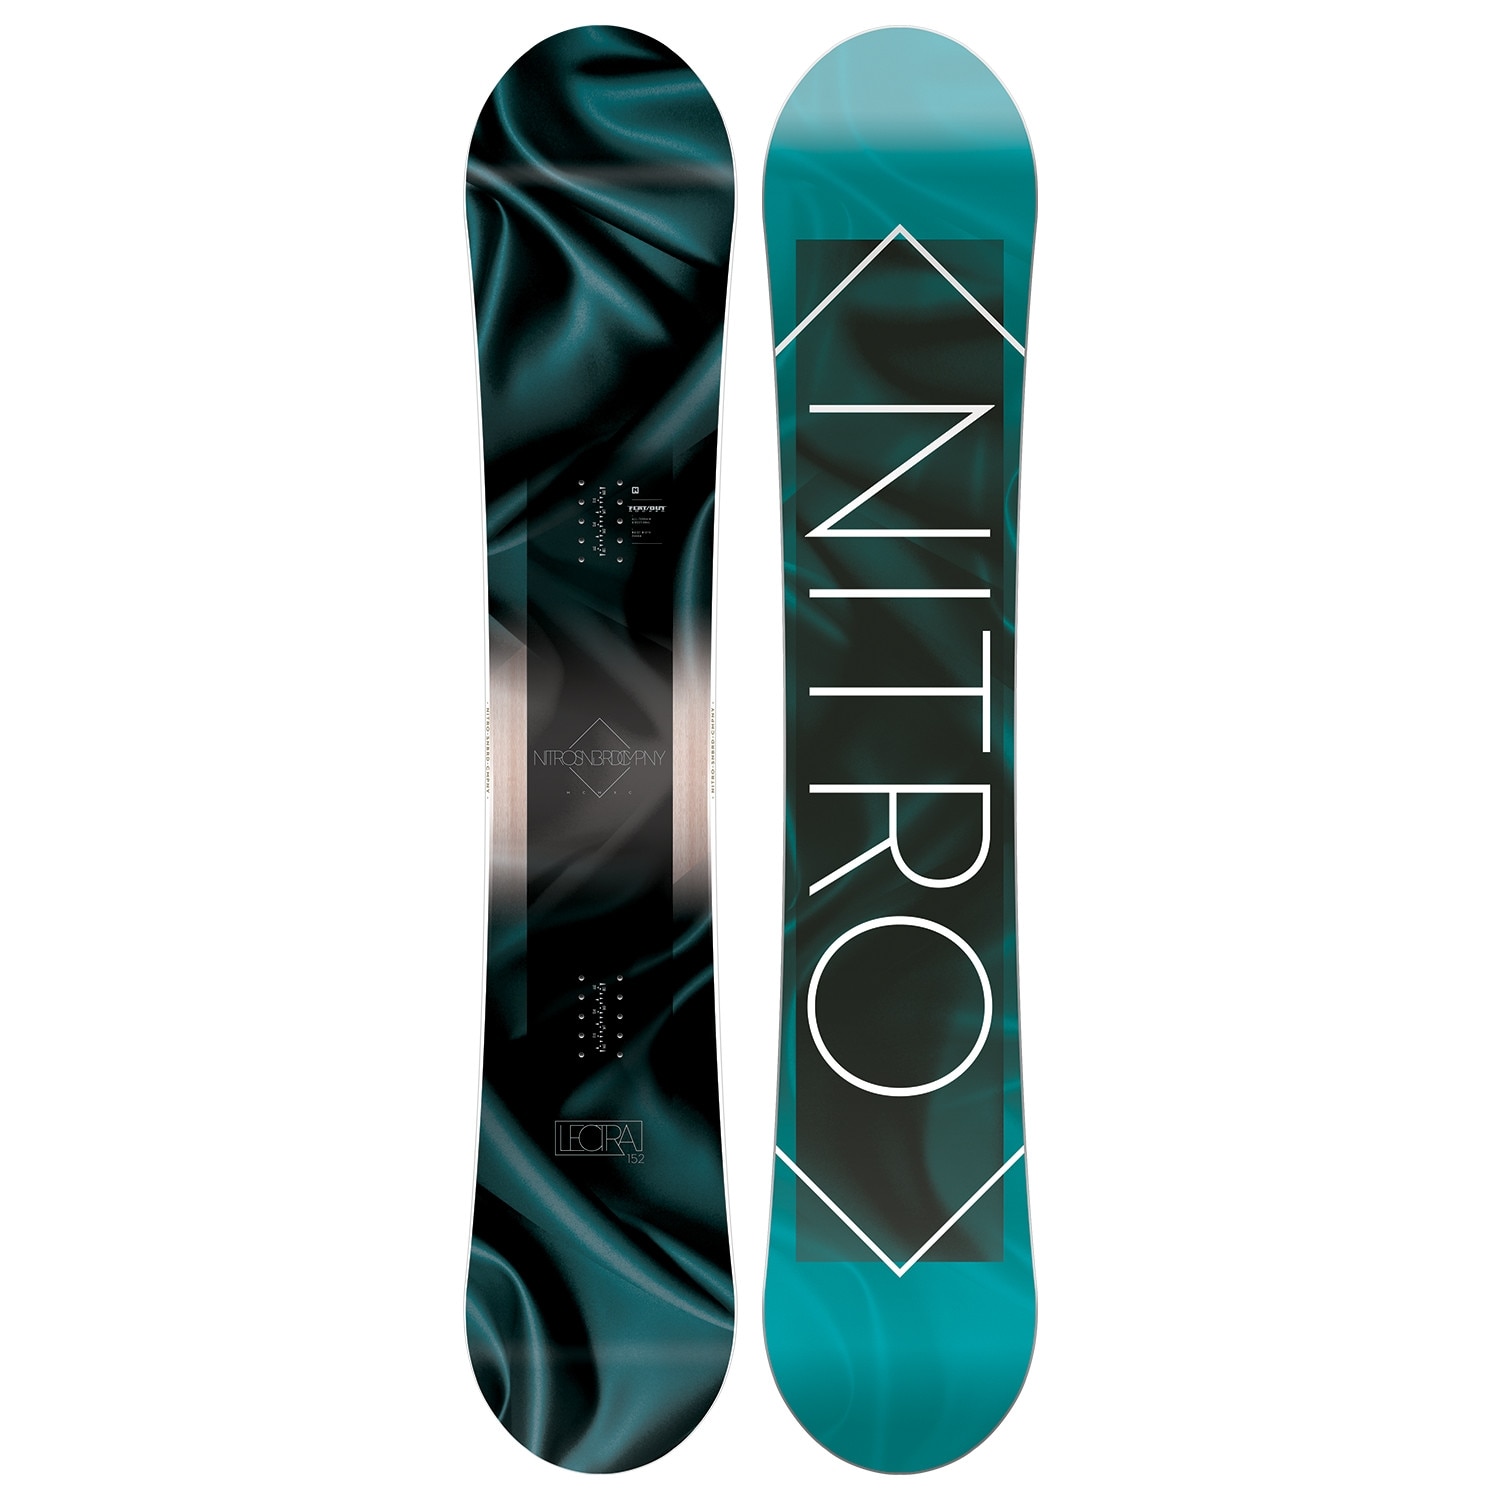 comment The owner Abnormal Placa snowboard Femei Nitro The Lectra 149 2019 - eMAG.ro